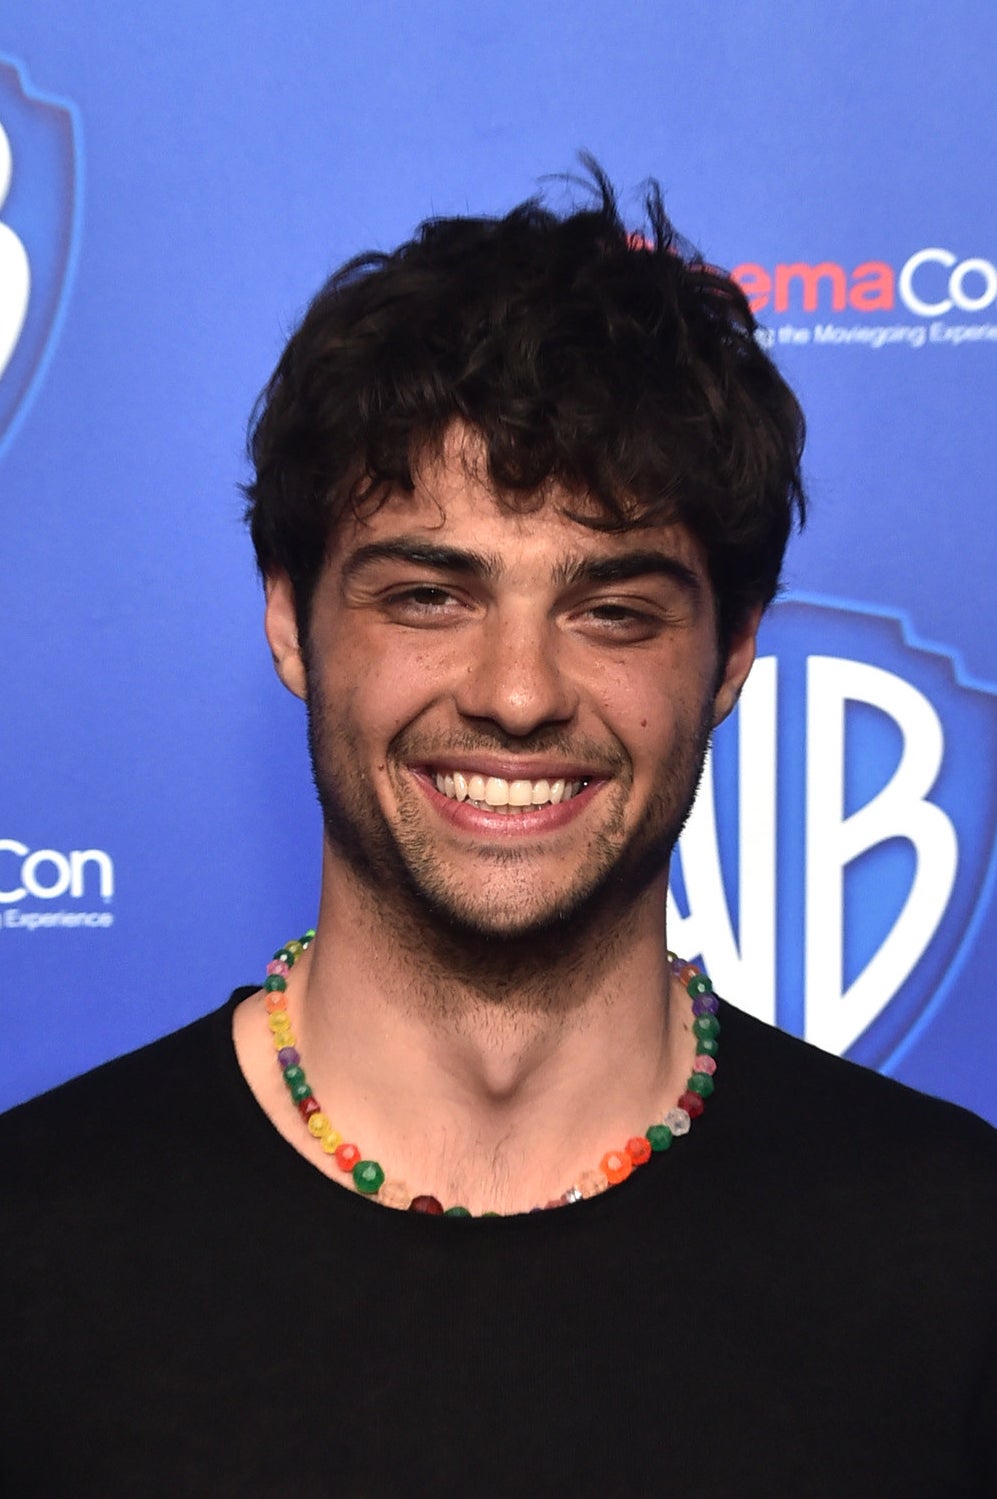 noah centineo is shown